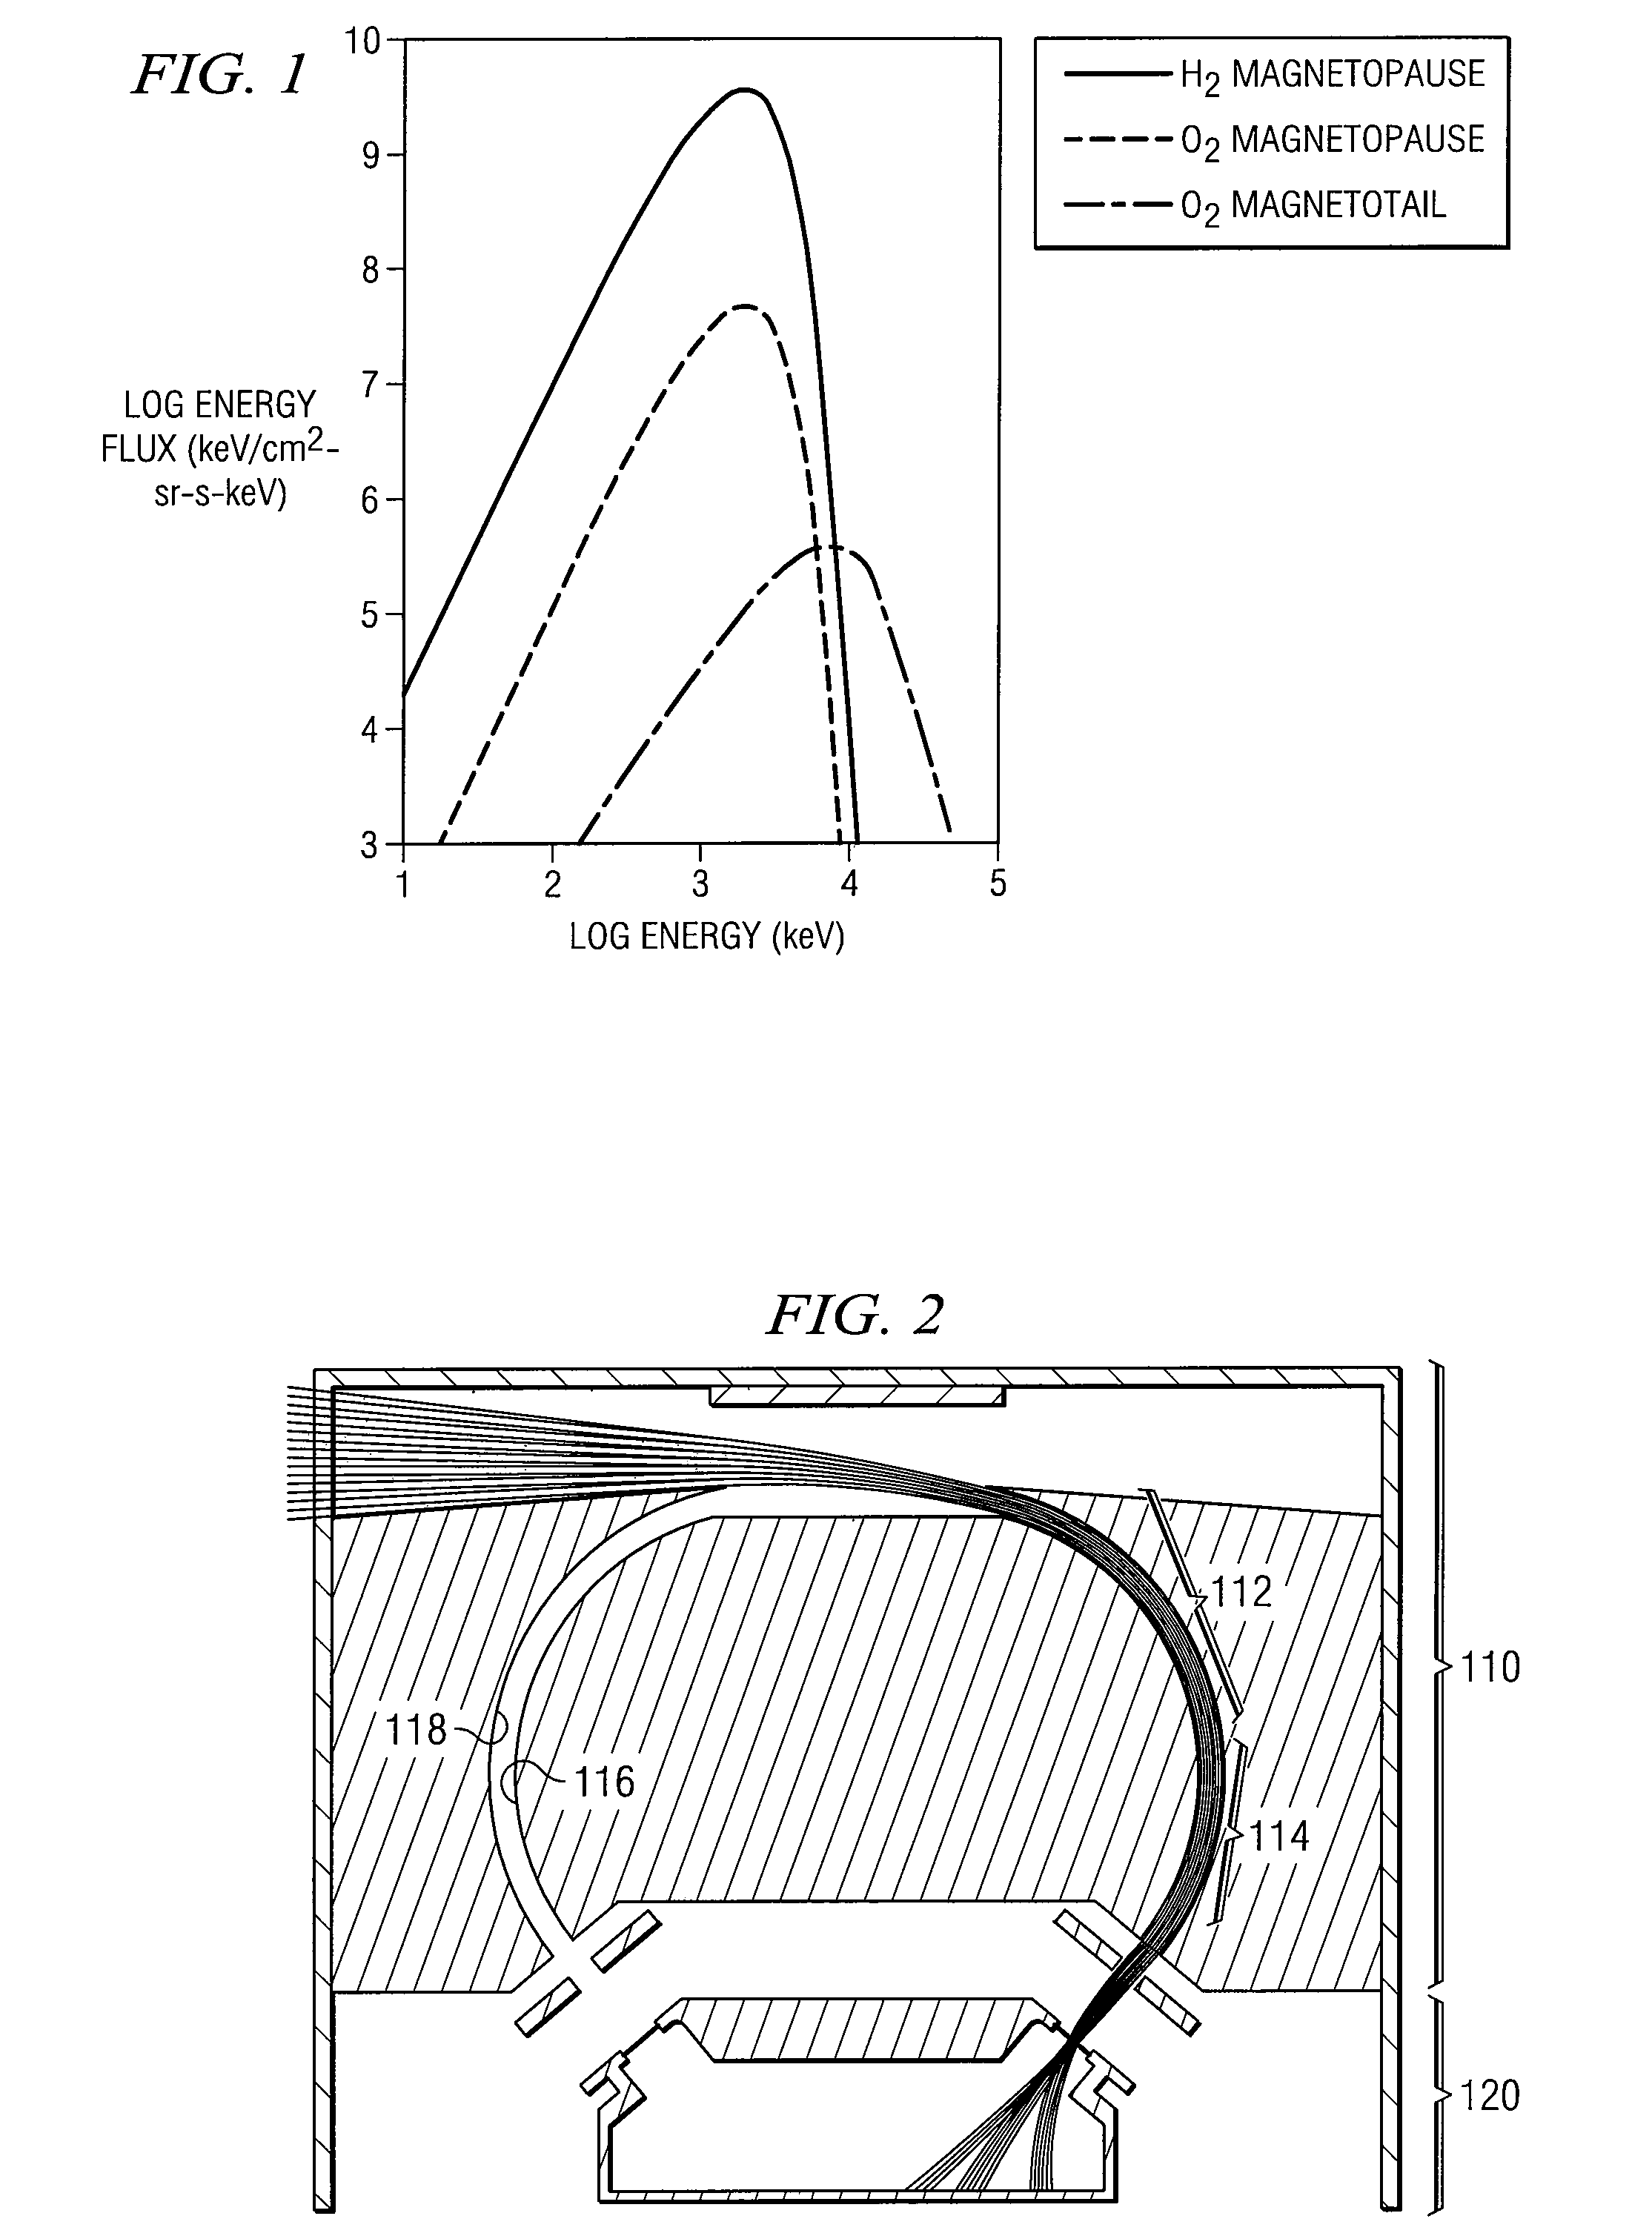 Ion Composition Analyzer with Increased Dynamic Range